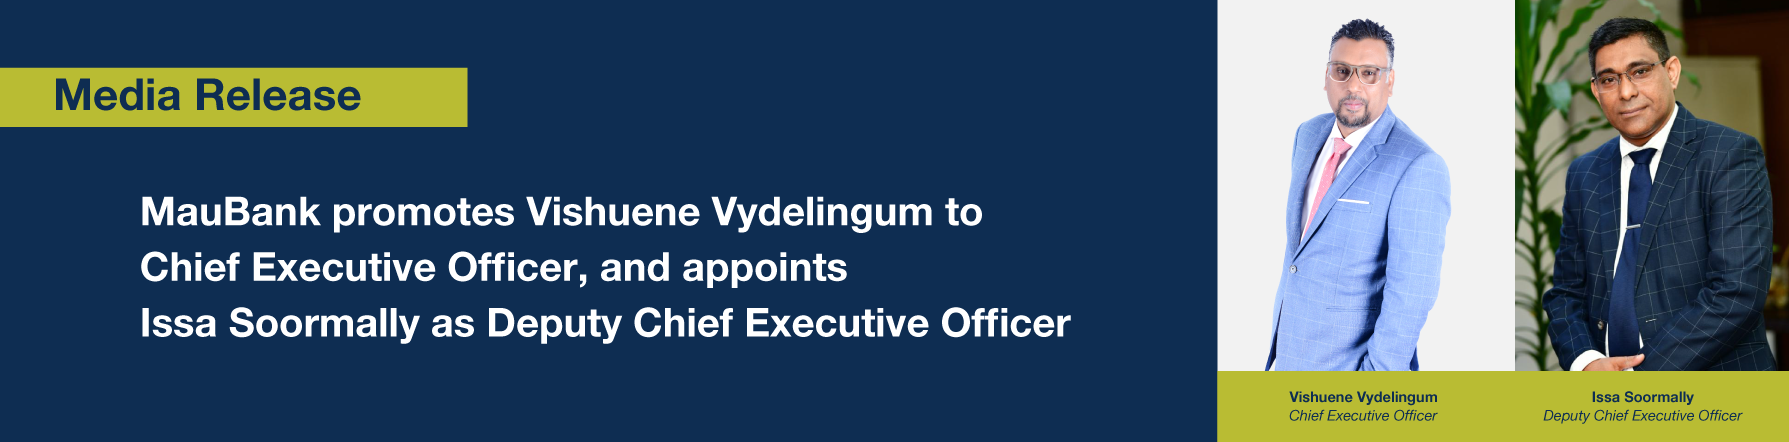 MEDIA RELEASE – MauBank promotes Vishuene Vydelingum to Chief Executive Officer, and appoints Issa Soormally as Deputy Chief Executive Officer